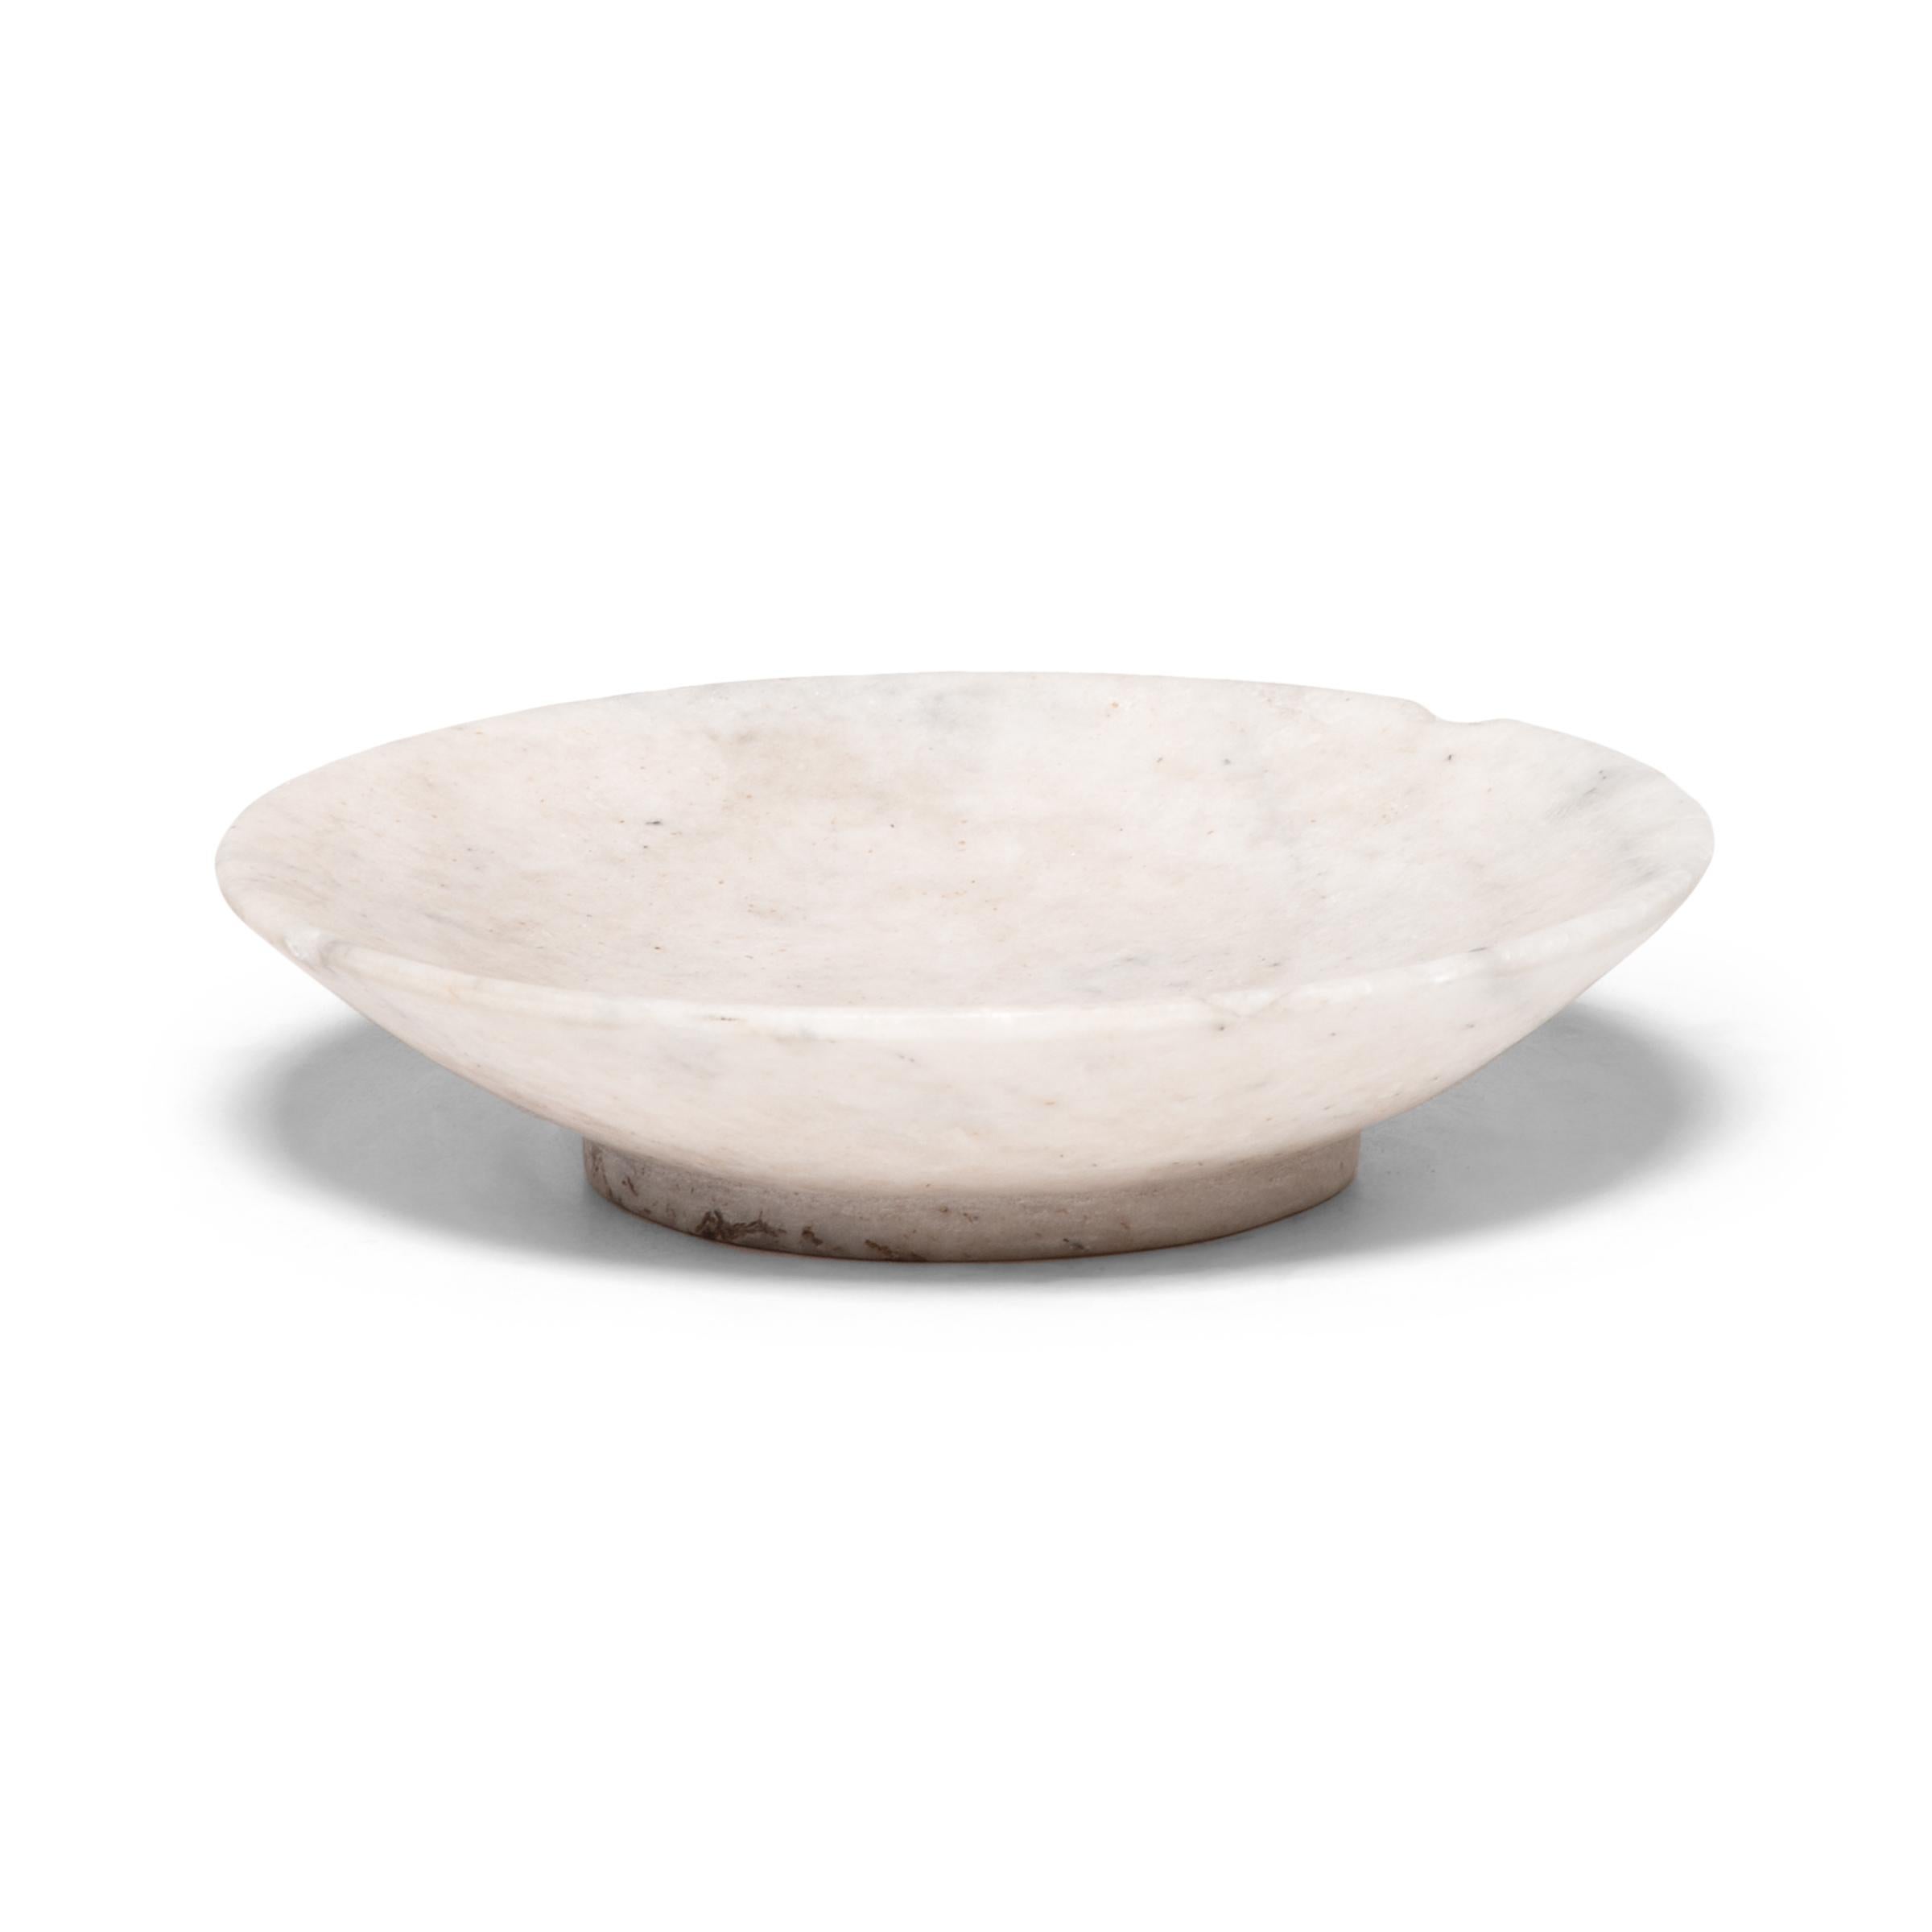 This hand carved marble dish from northern China is modeled after the delicate forms of footed porcelain rice bowls. Carefully worked with a smooth finish, the shallow plate is perfect as a vide-poche for jewelry and precious smalls.